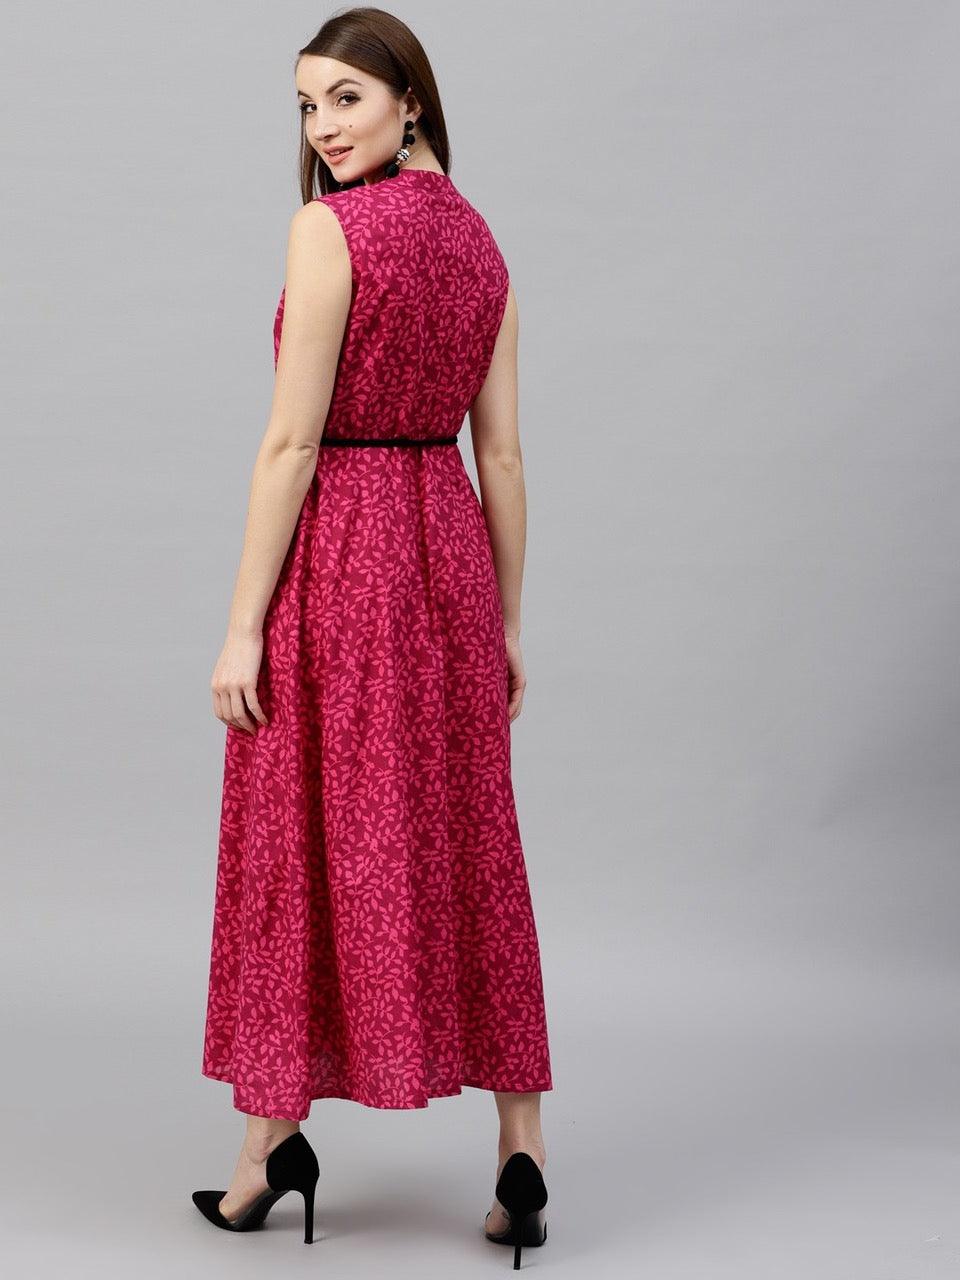 Magenta Printed Button Down Maxi Dress With Belt Details (Fully Stitched) - Znxclothing